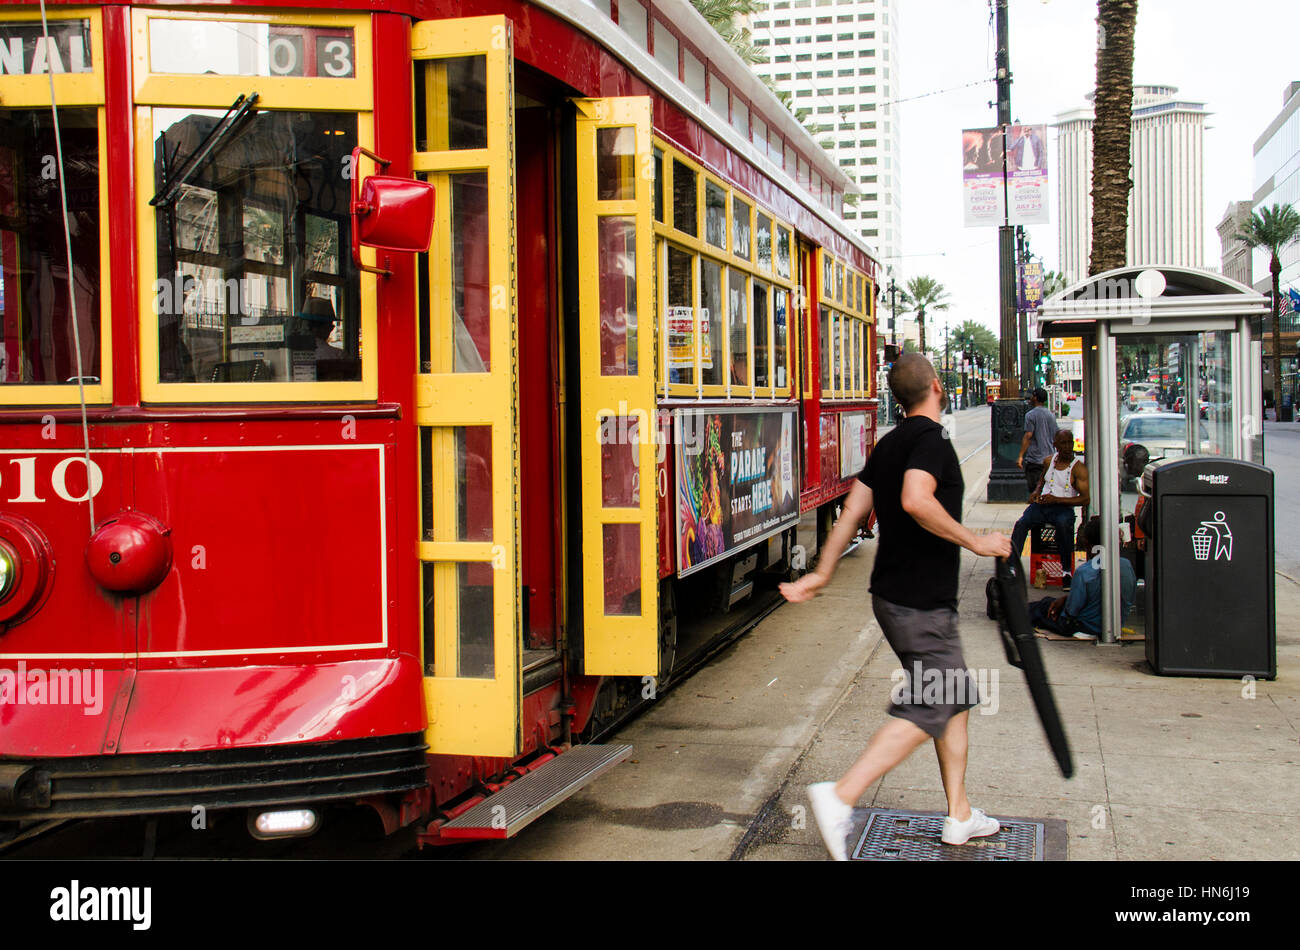 New Orleans, USA - July 8, 2015: People get off from a Canal Street line streetcar in the downtown of New Orleans, Louisiana. Stock Photo